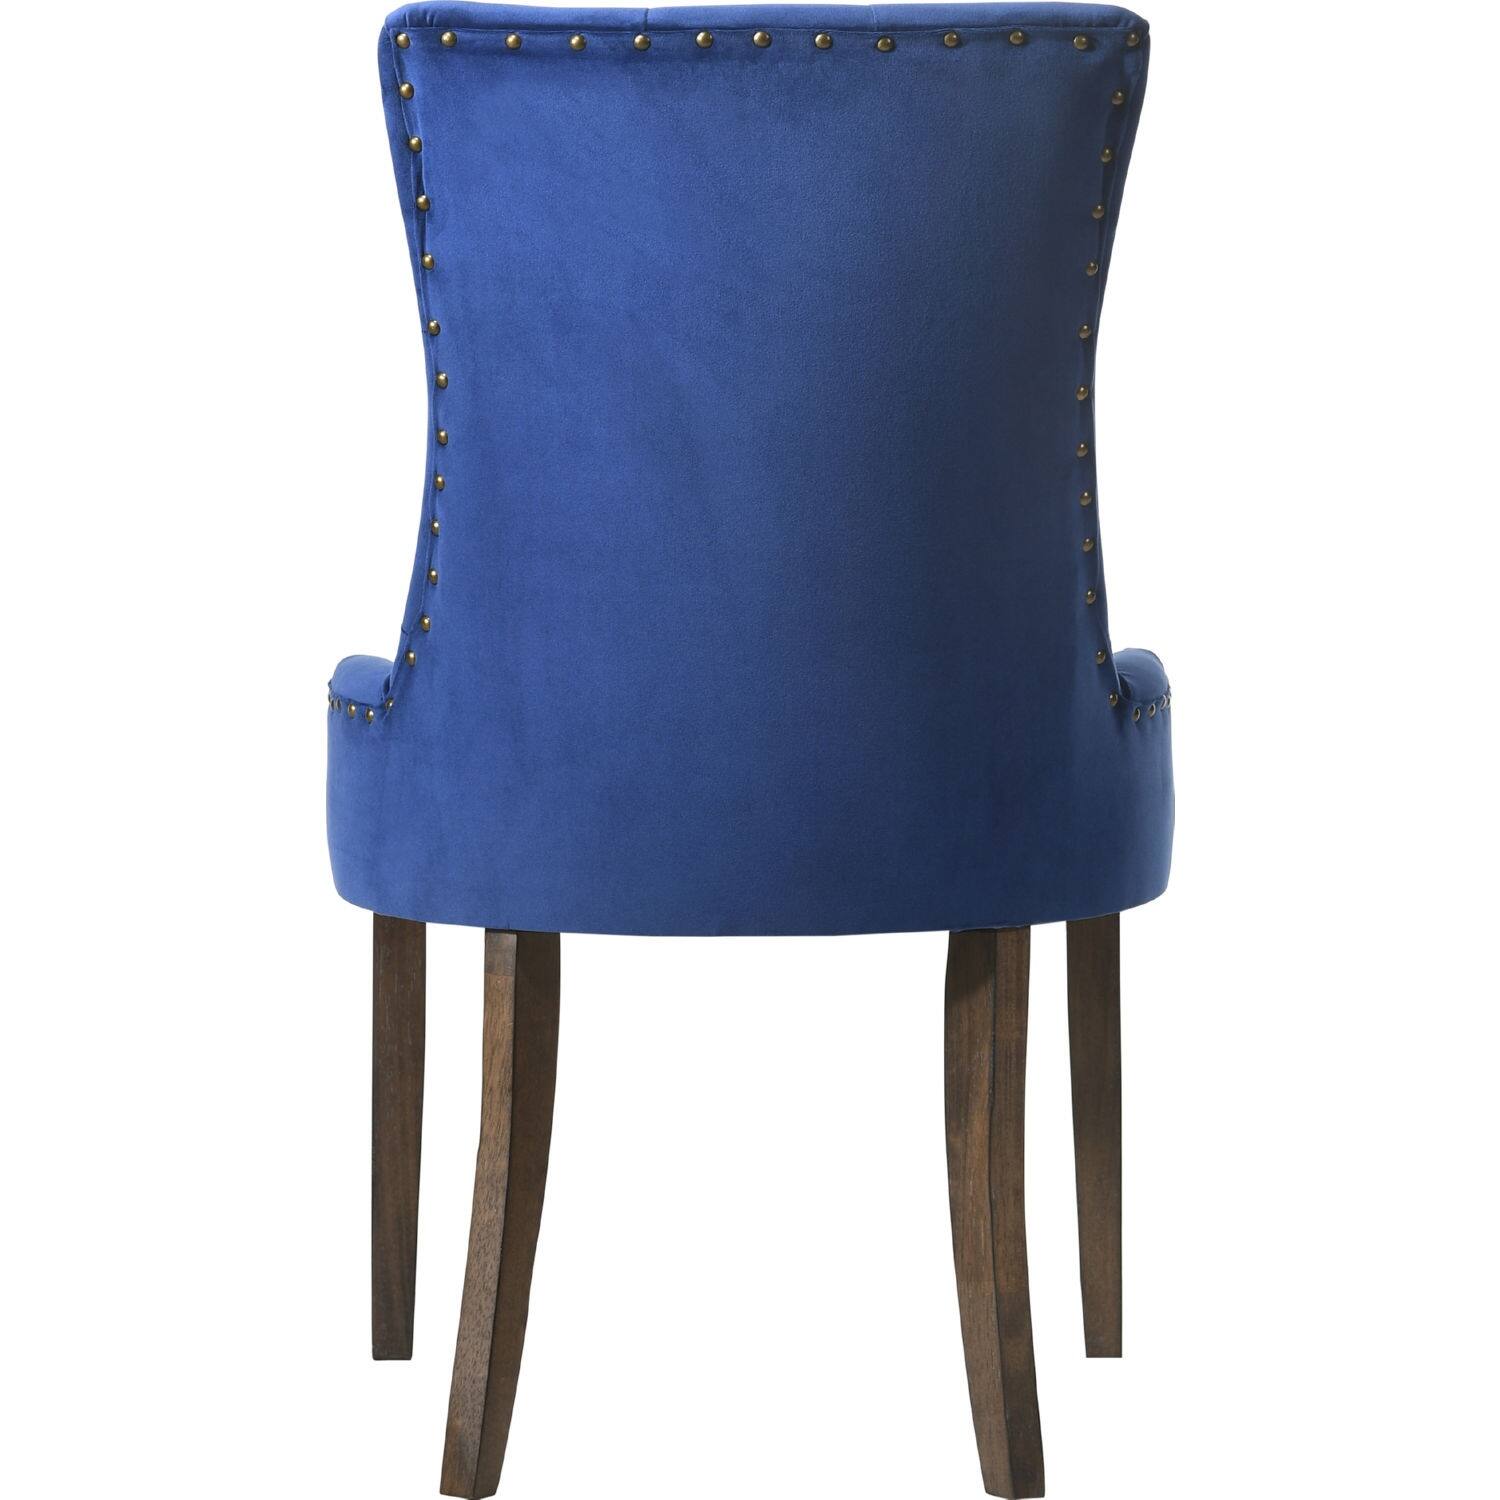 Set of 2 Upholstered Side Chair with Nail-head Trim